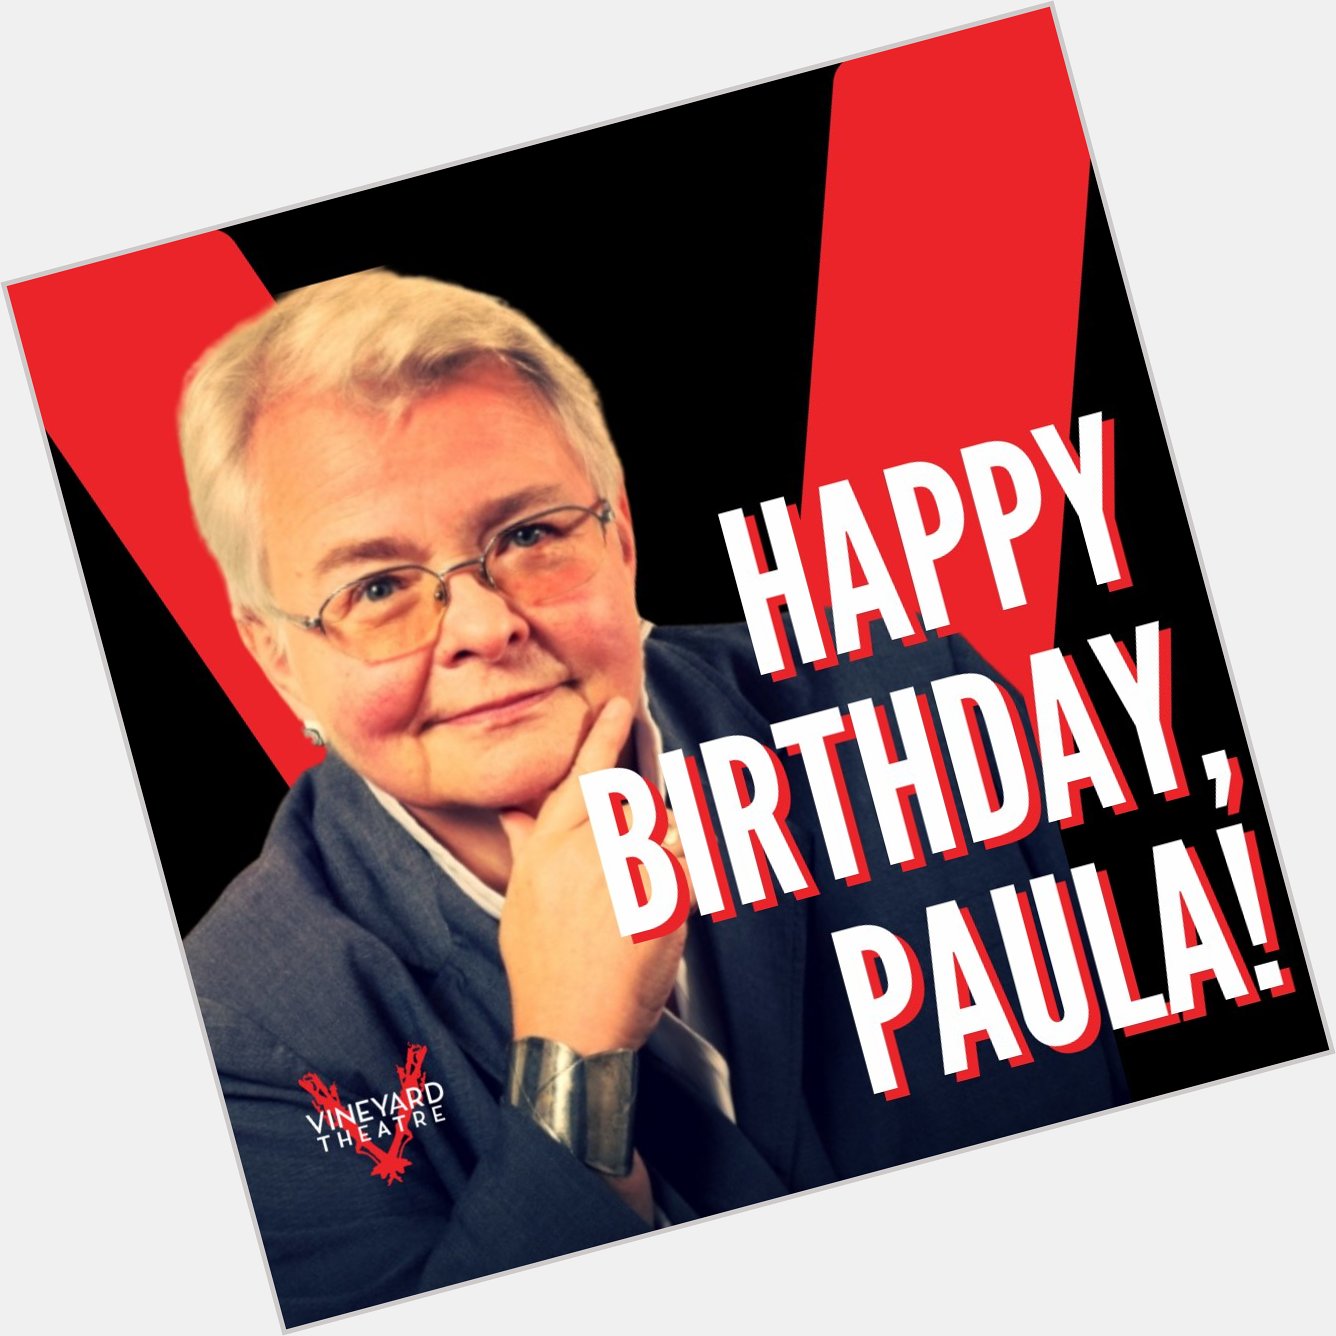 HAPPY BIRTHDAY to PAULA VOGEL!
An extraordinary artist and a beloved member of the Vineyard family 